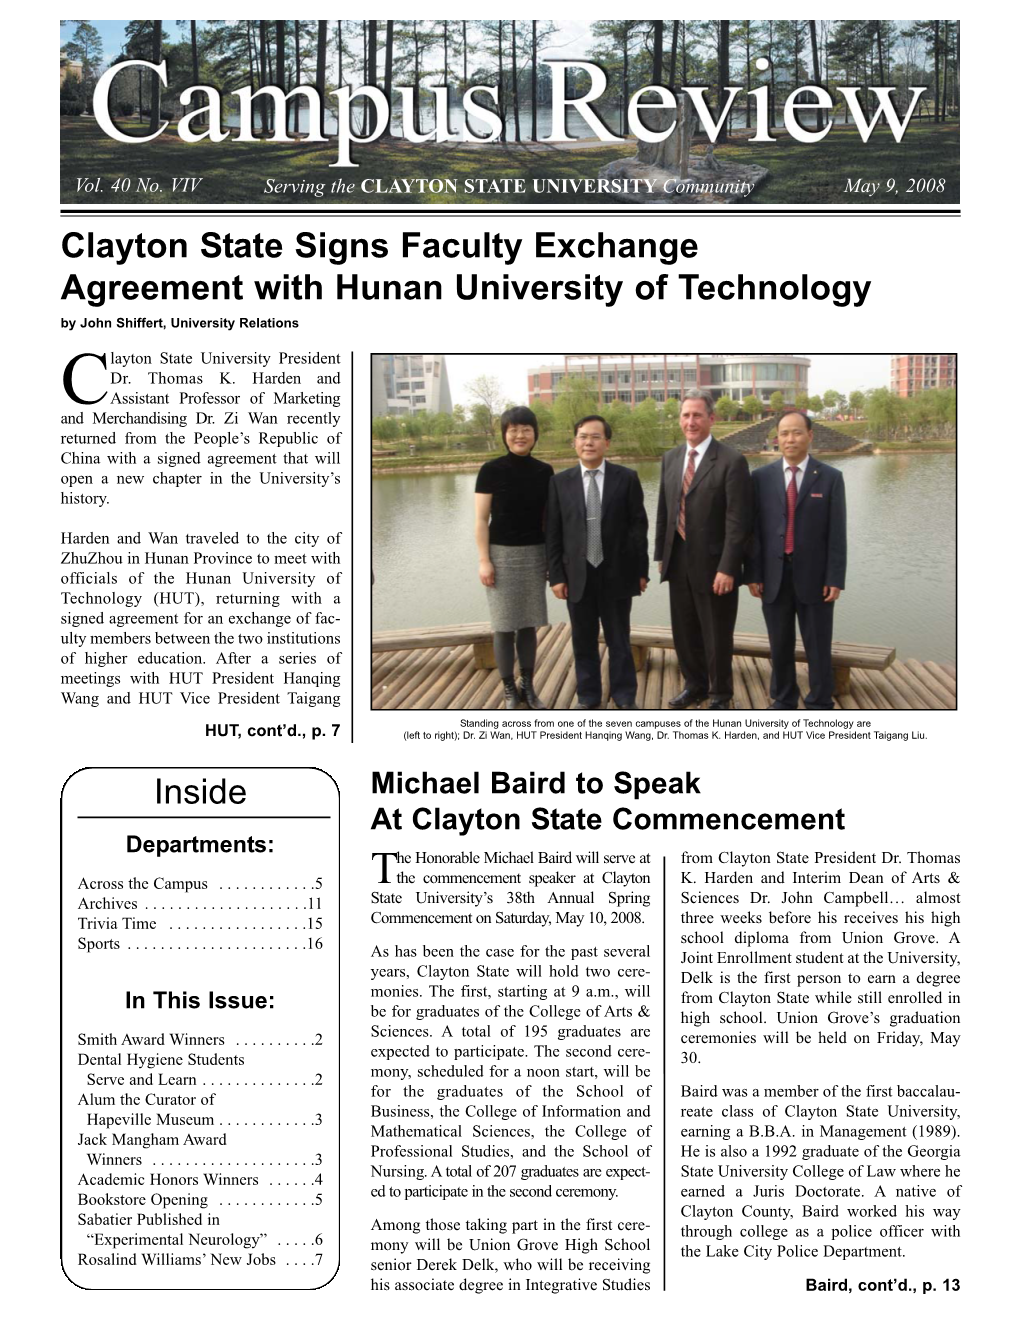 May 9, 2008 Clayton State Signs Faculty Exchange Agreement with Hunan University of Technology by John Shiffert, University Relations